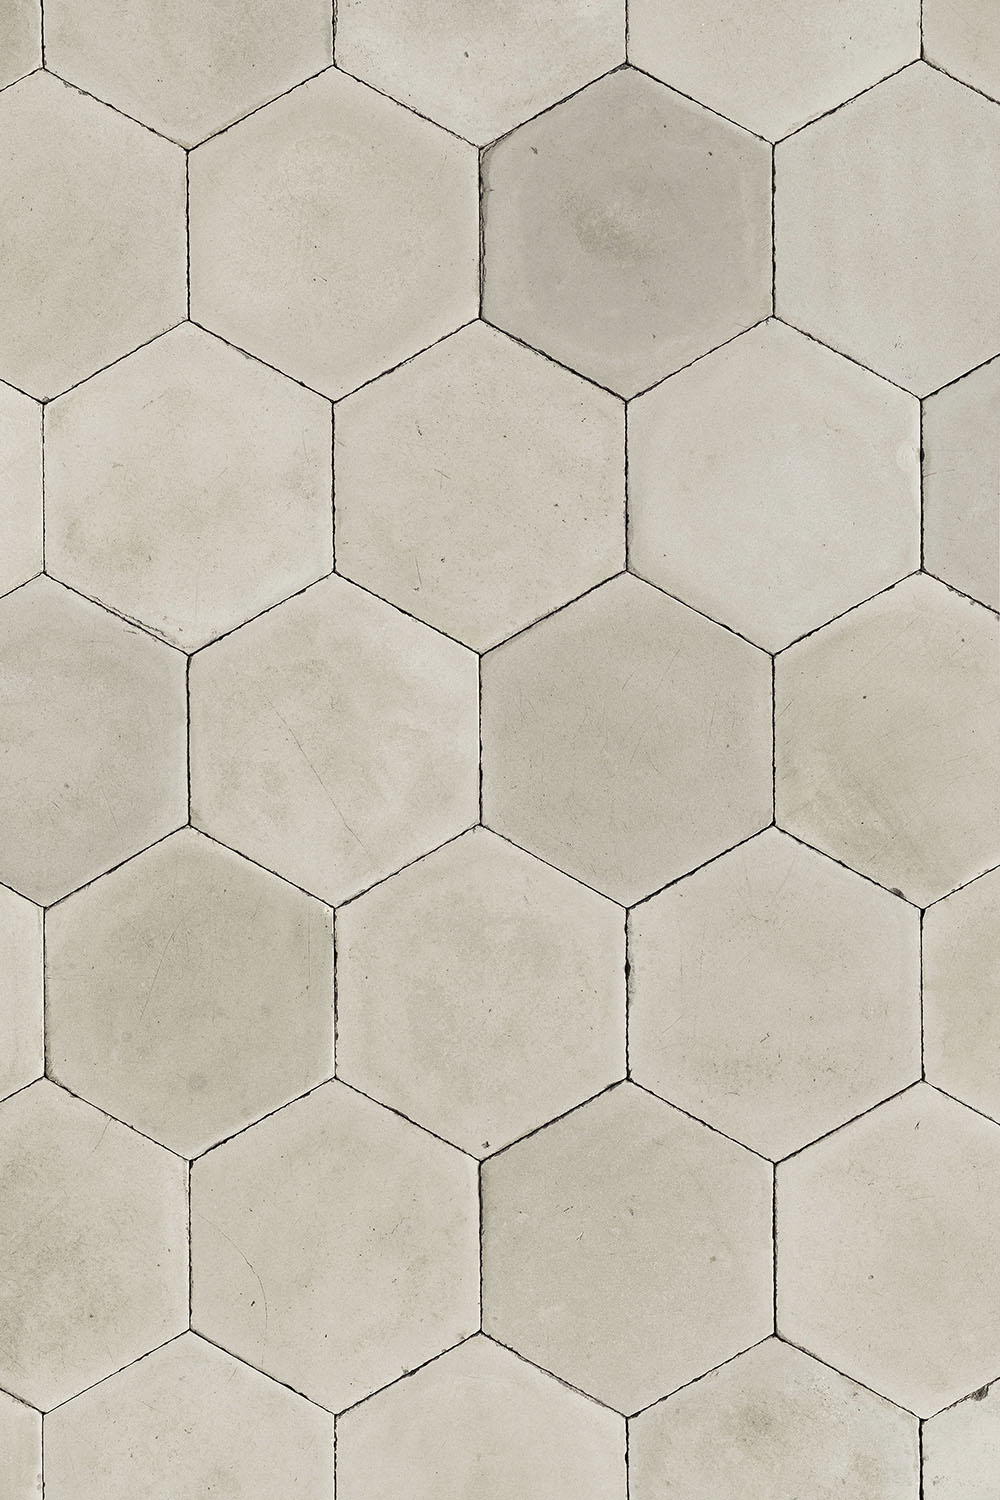 Hexagon floor tiles background with antique look for photography